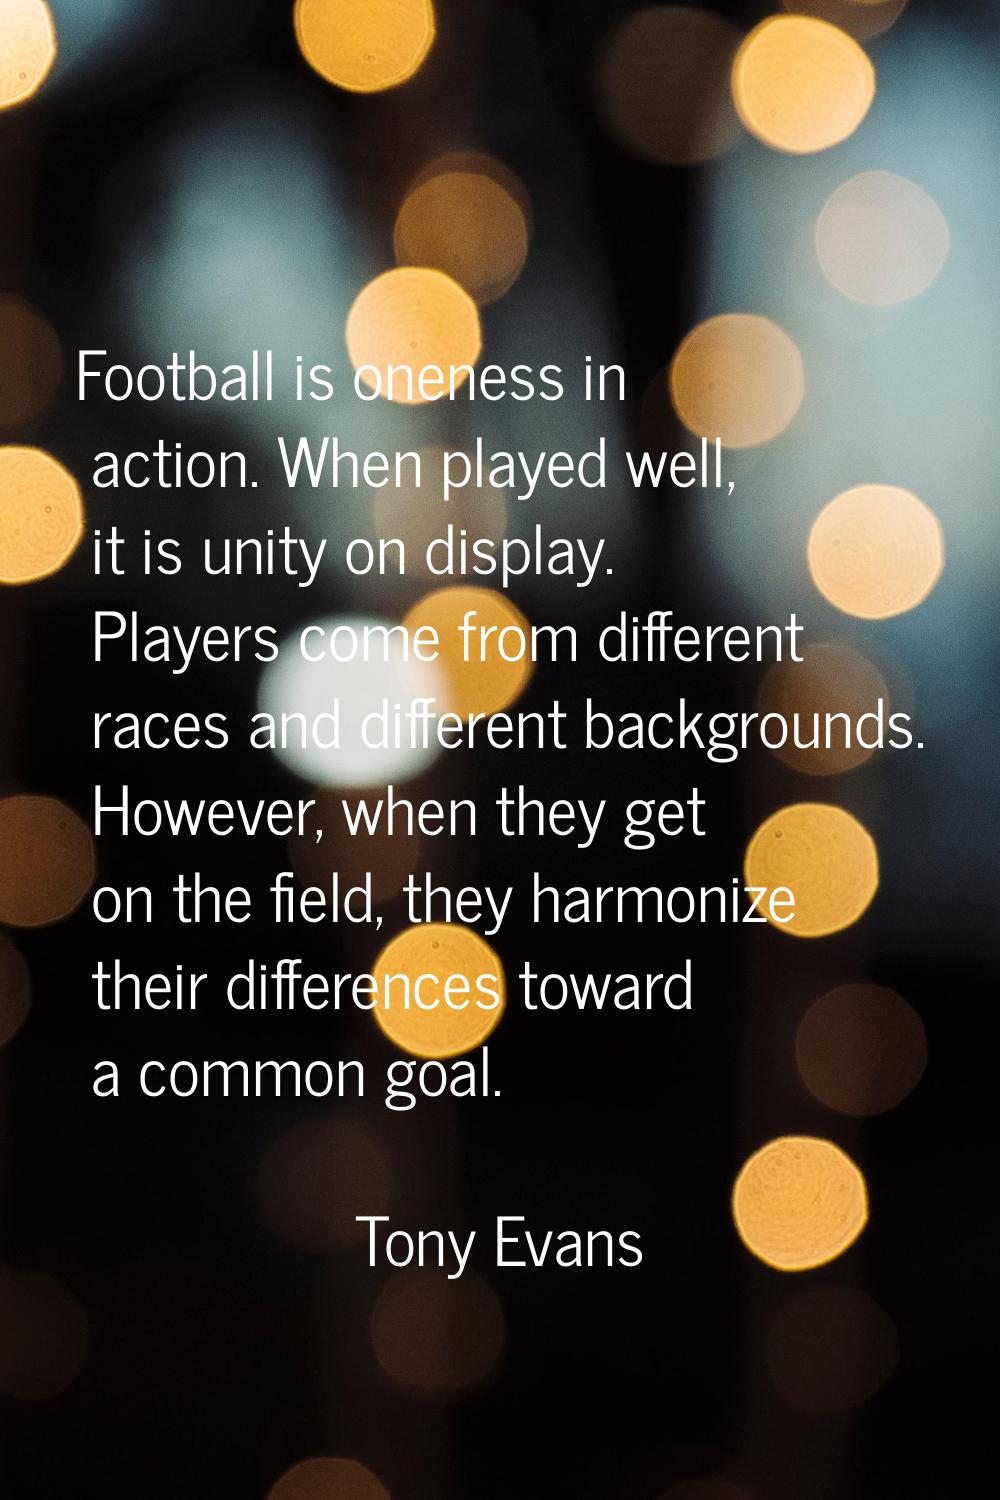 Football is oneness in action. When played well, it is unity on display. Players come from differen